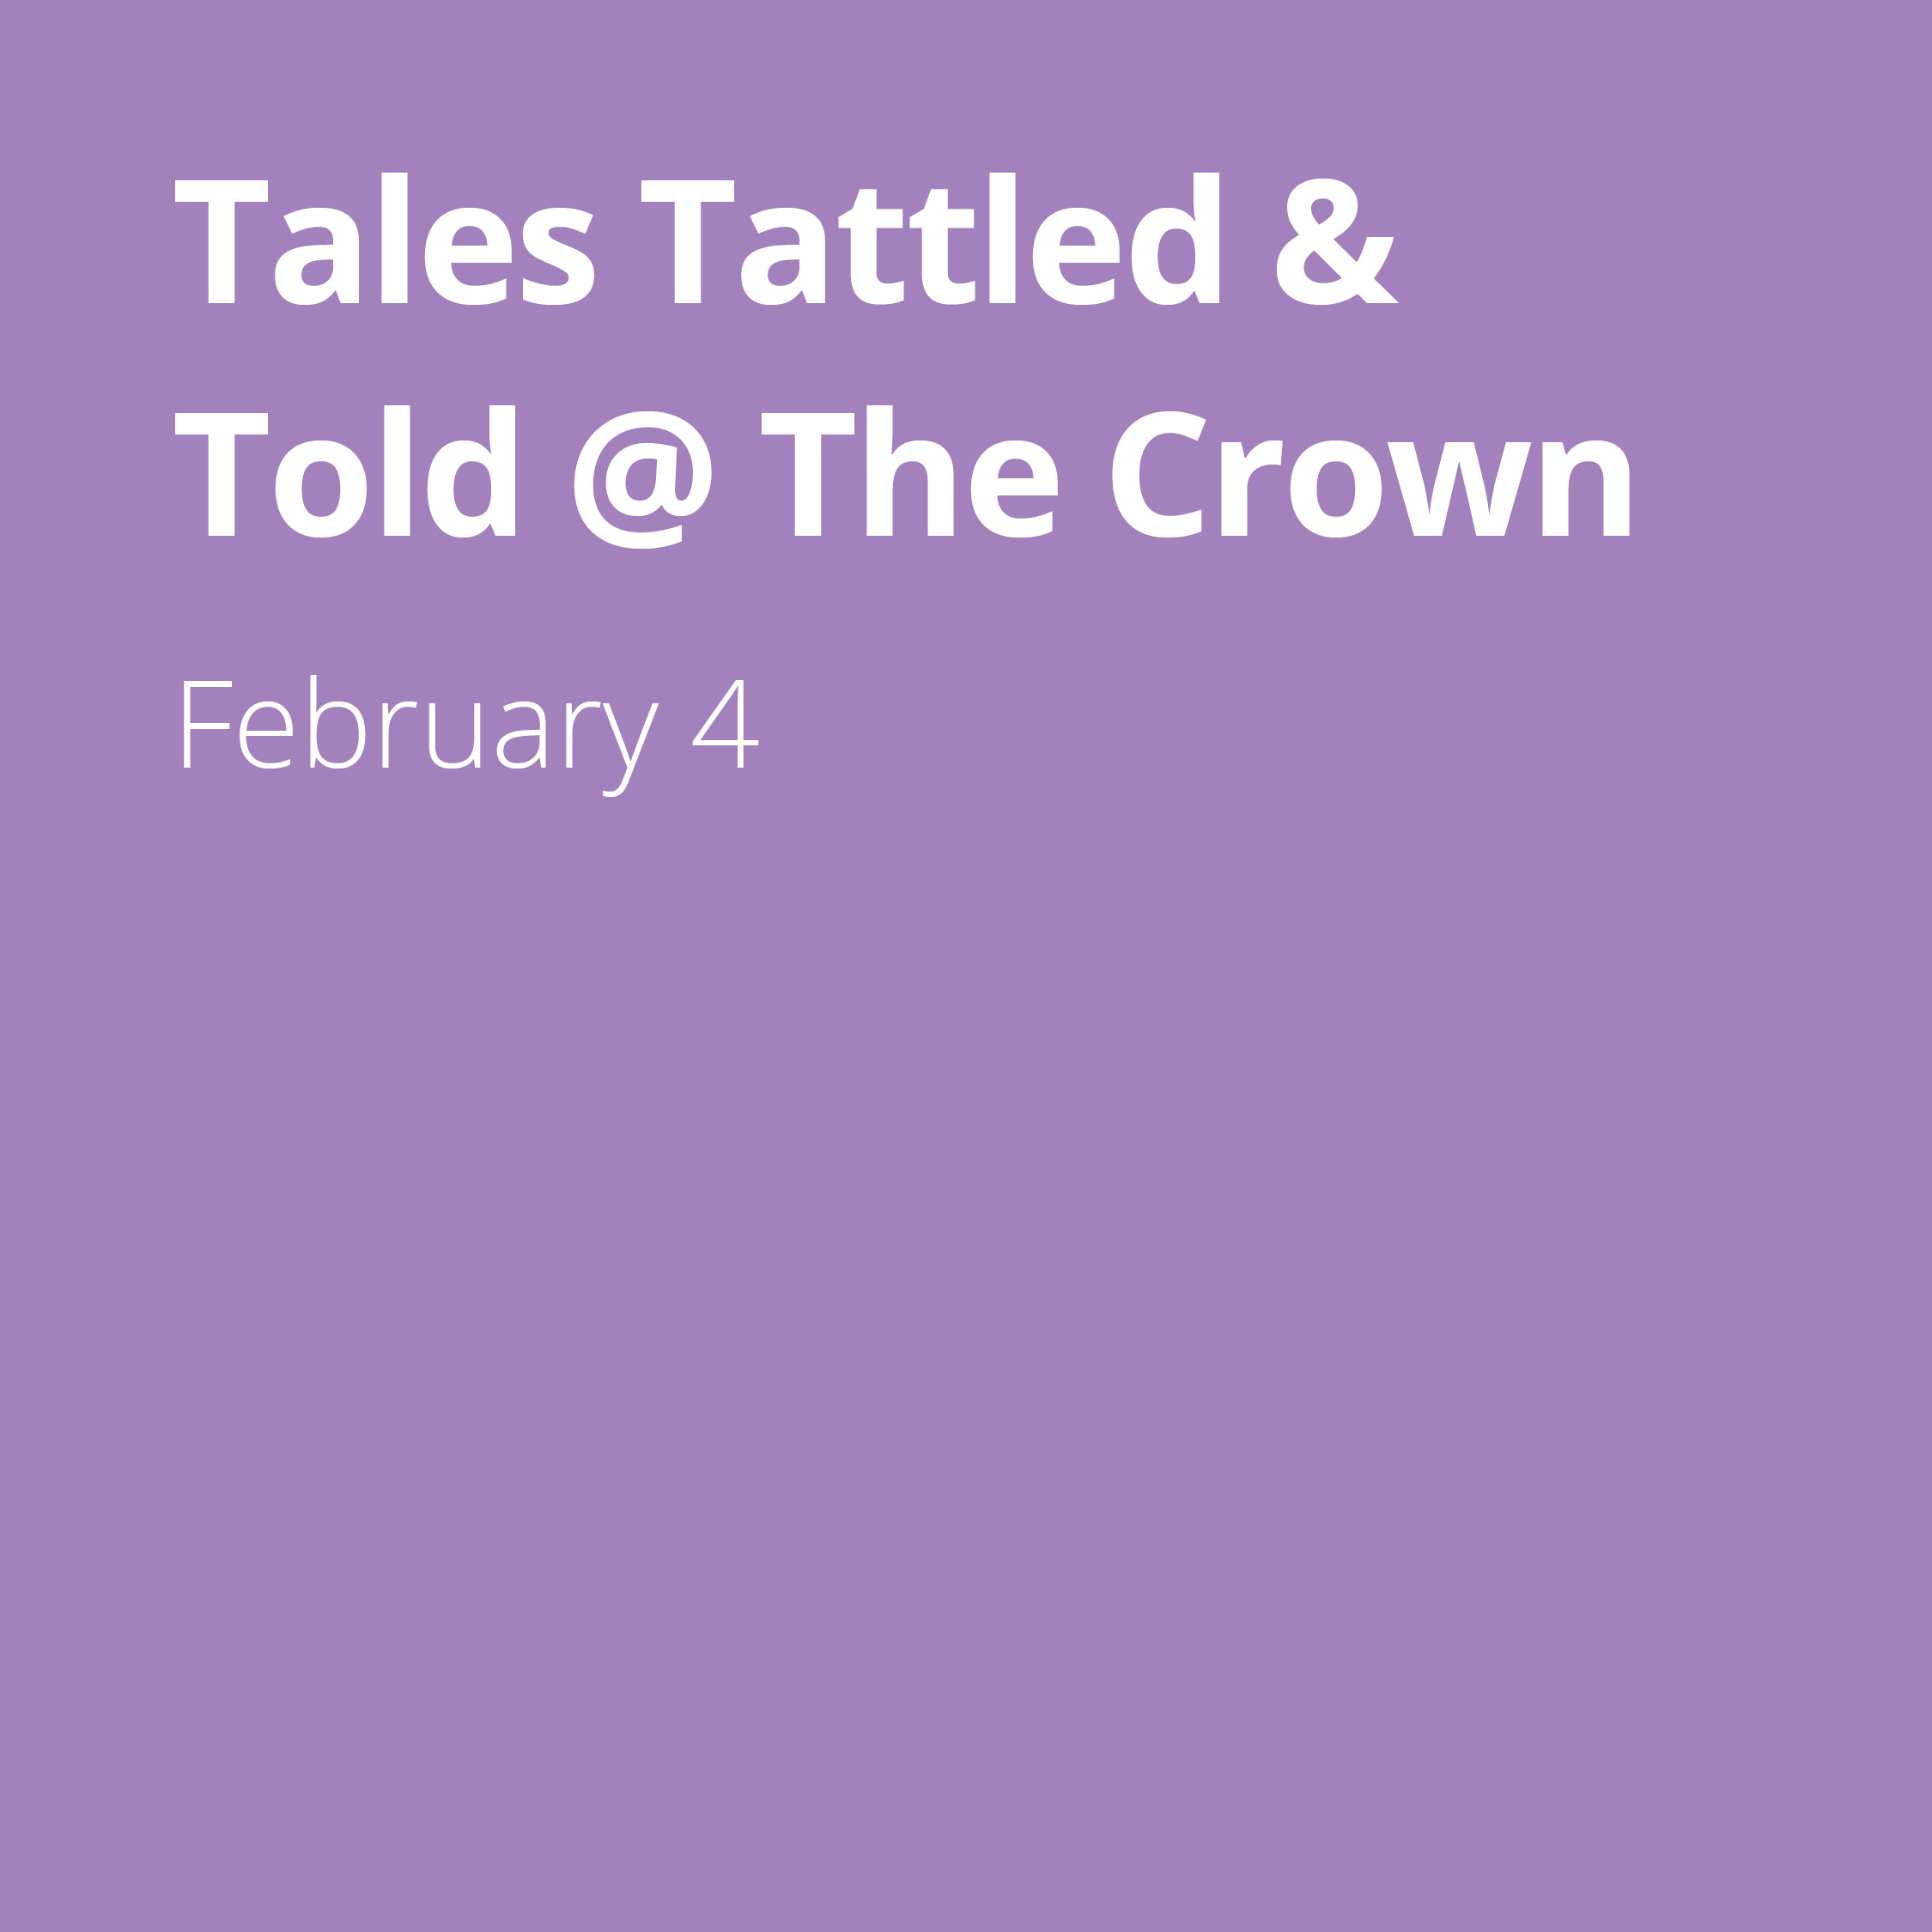 Tales Tattled & Told @ The Crown